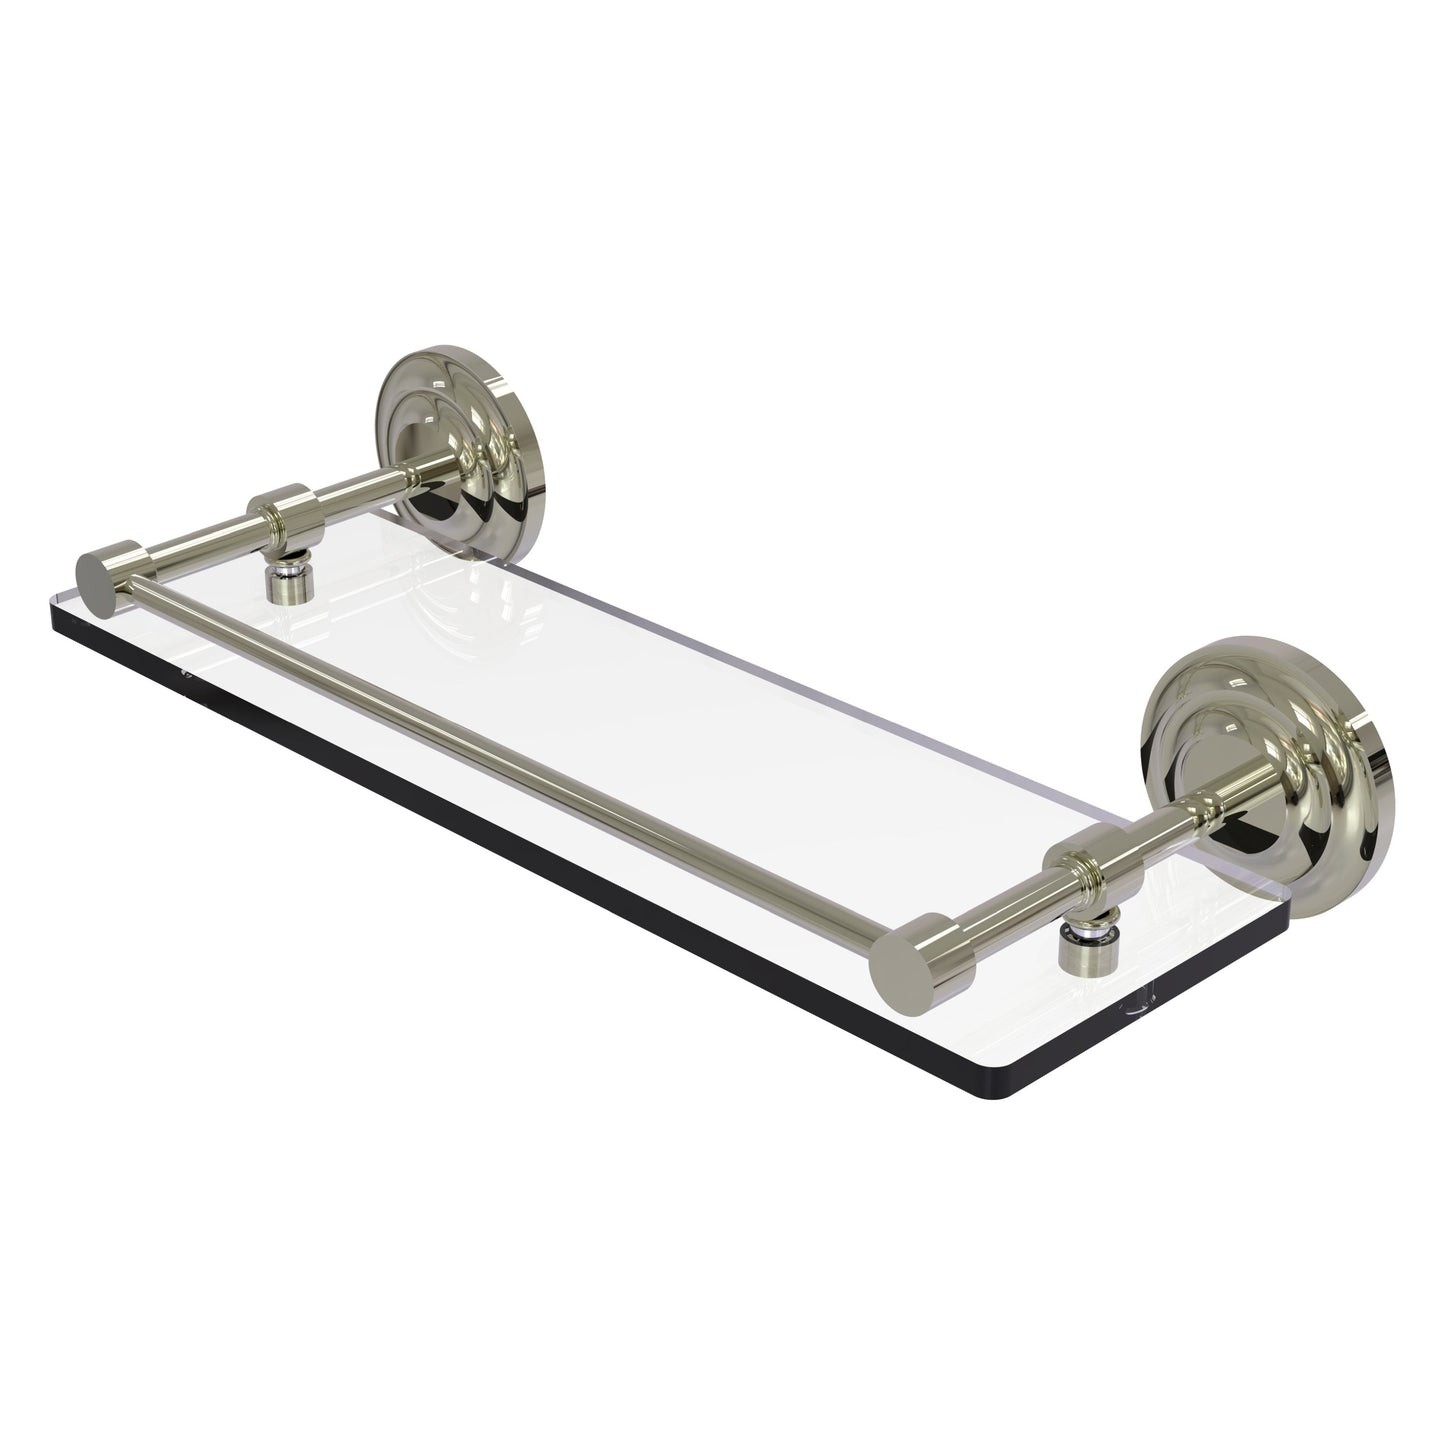 Allied Brass Que New 16" x 5" Polished Nickel Solid Brass 16-Inch Tempered Glass Shelf With Gallery Rail